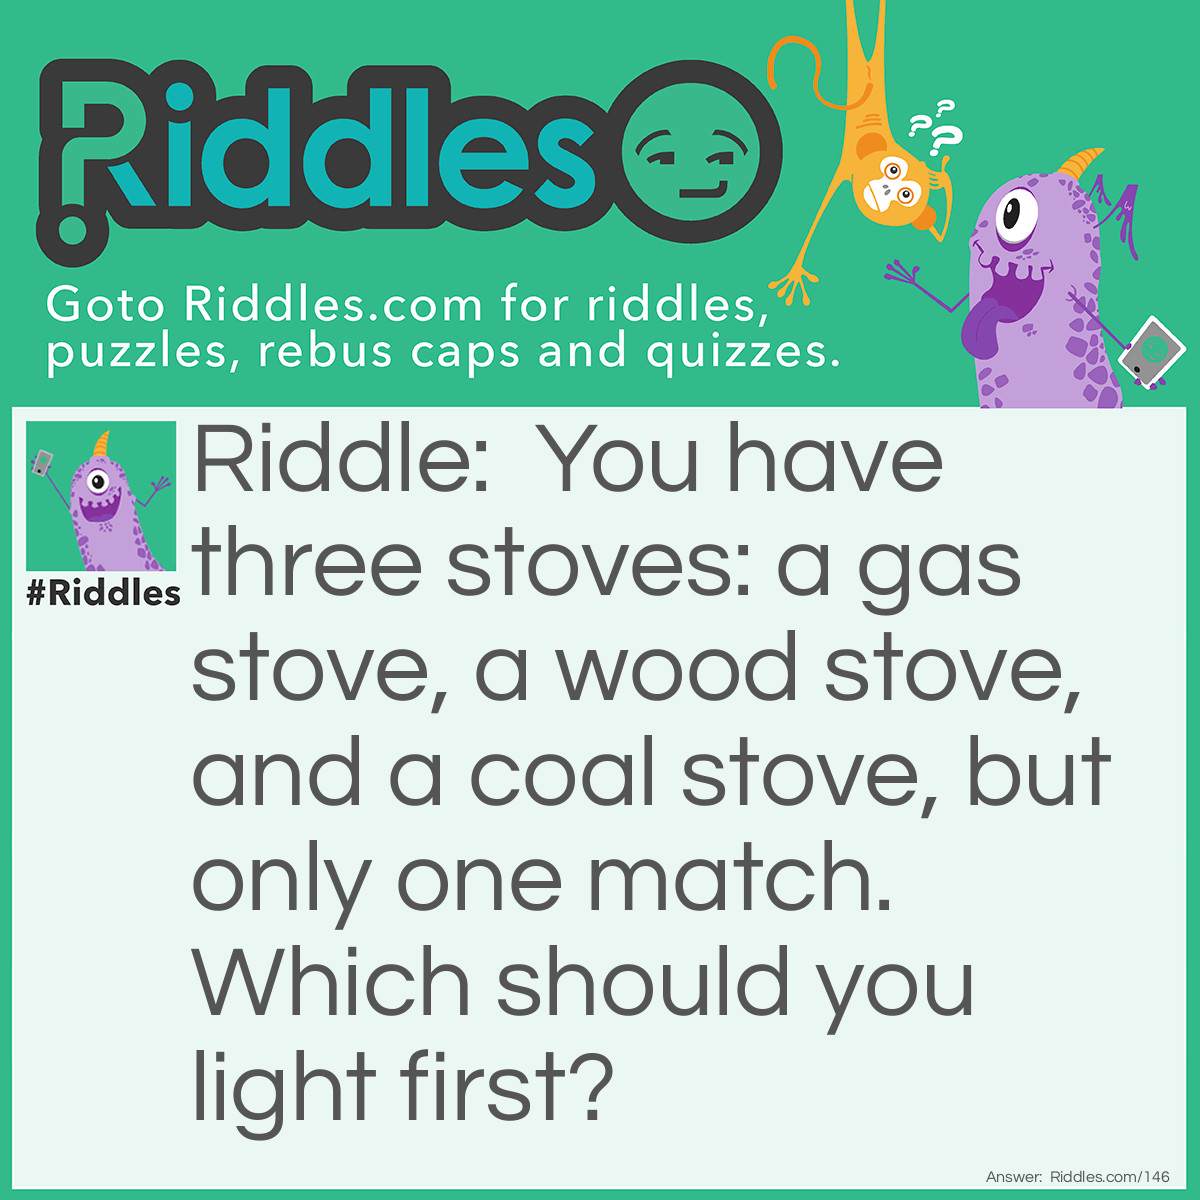 Riddle: You have three stoves: a gas stove, a wood stove, and a coal stove, but only one match. Which should you <a href="/post/66/fire-riddles">light</a> first? Answer: The match!